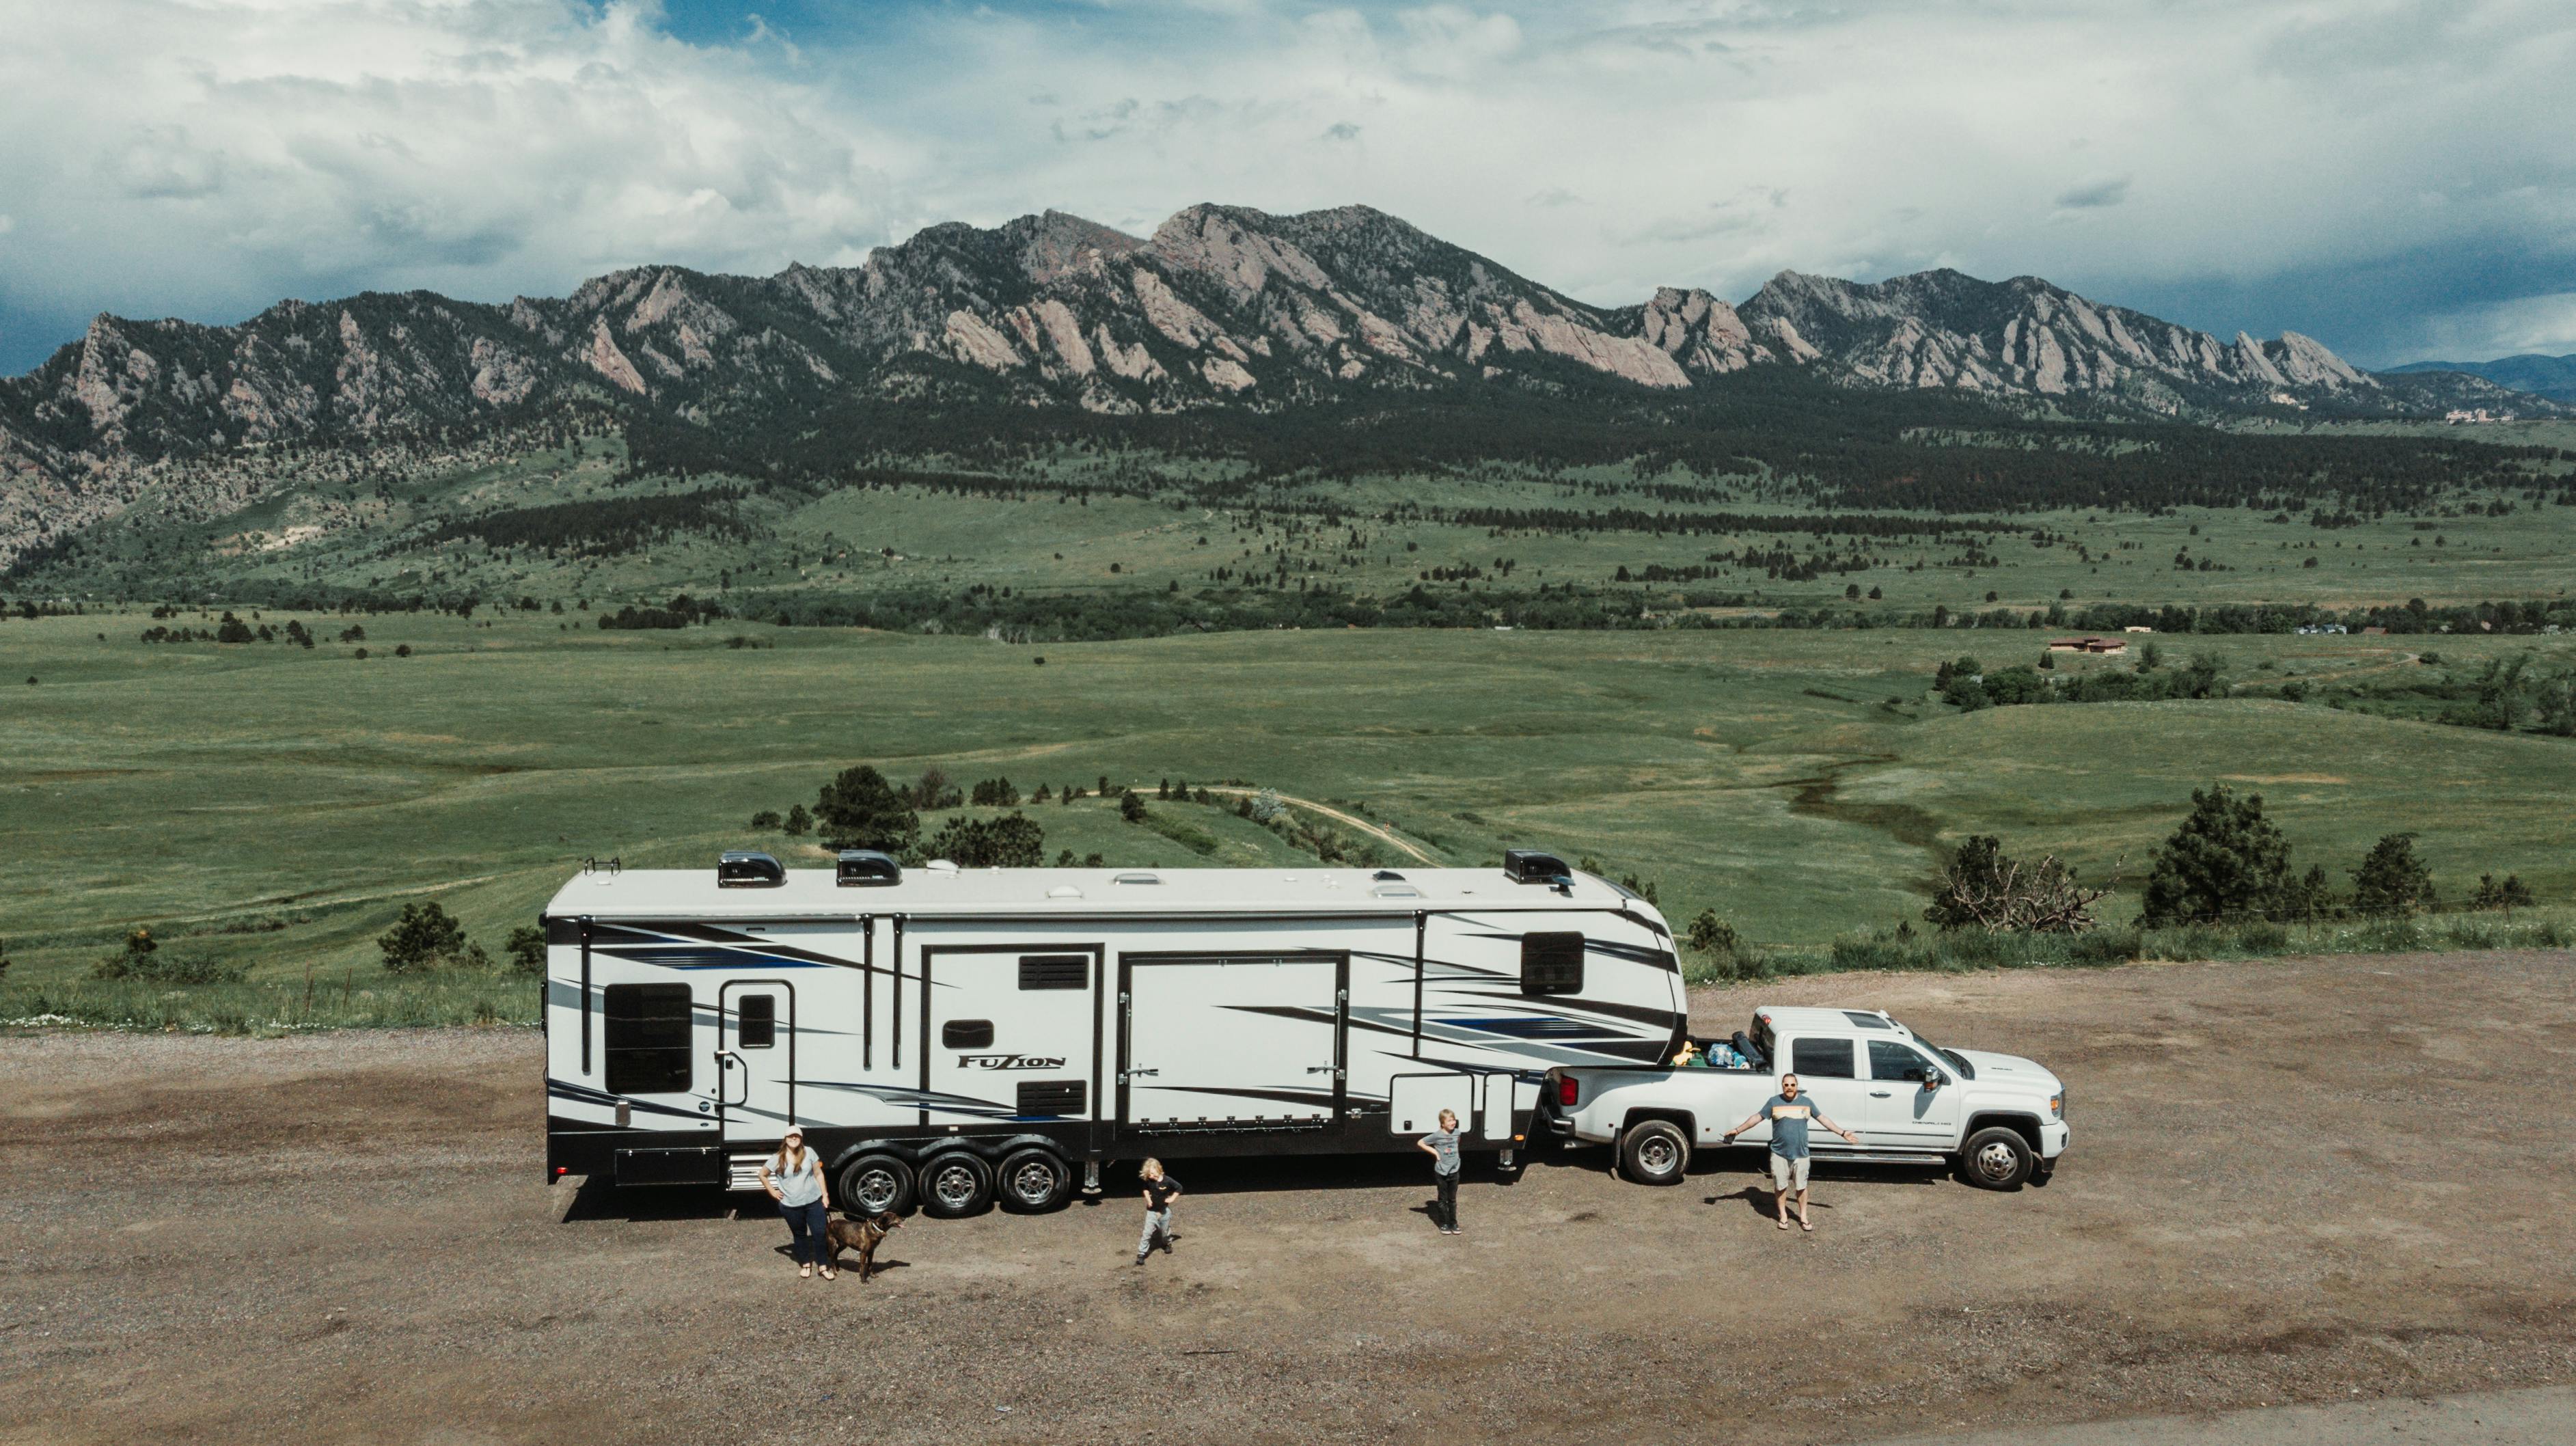 Andy and Kristen Murphy's RV parked in front of a mountain range at Estes Park